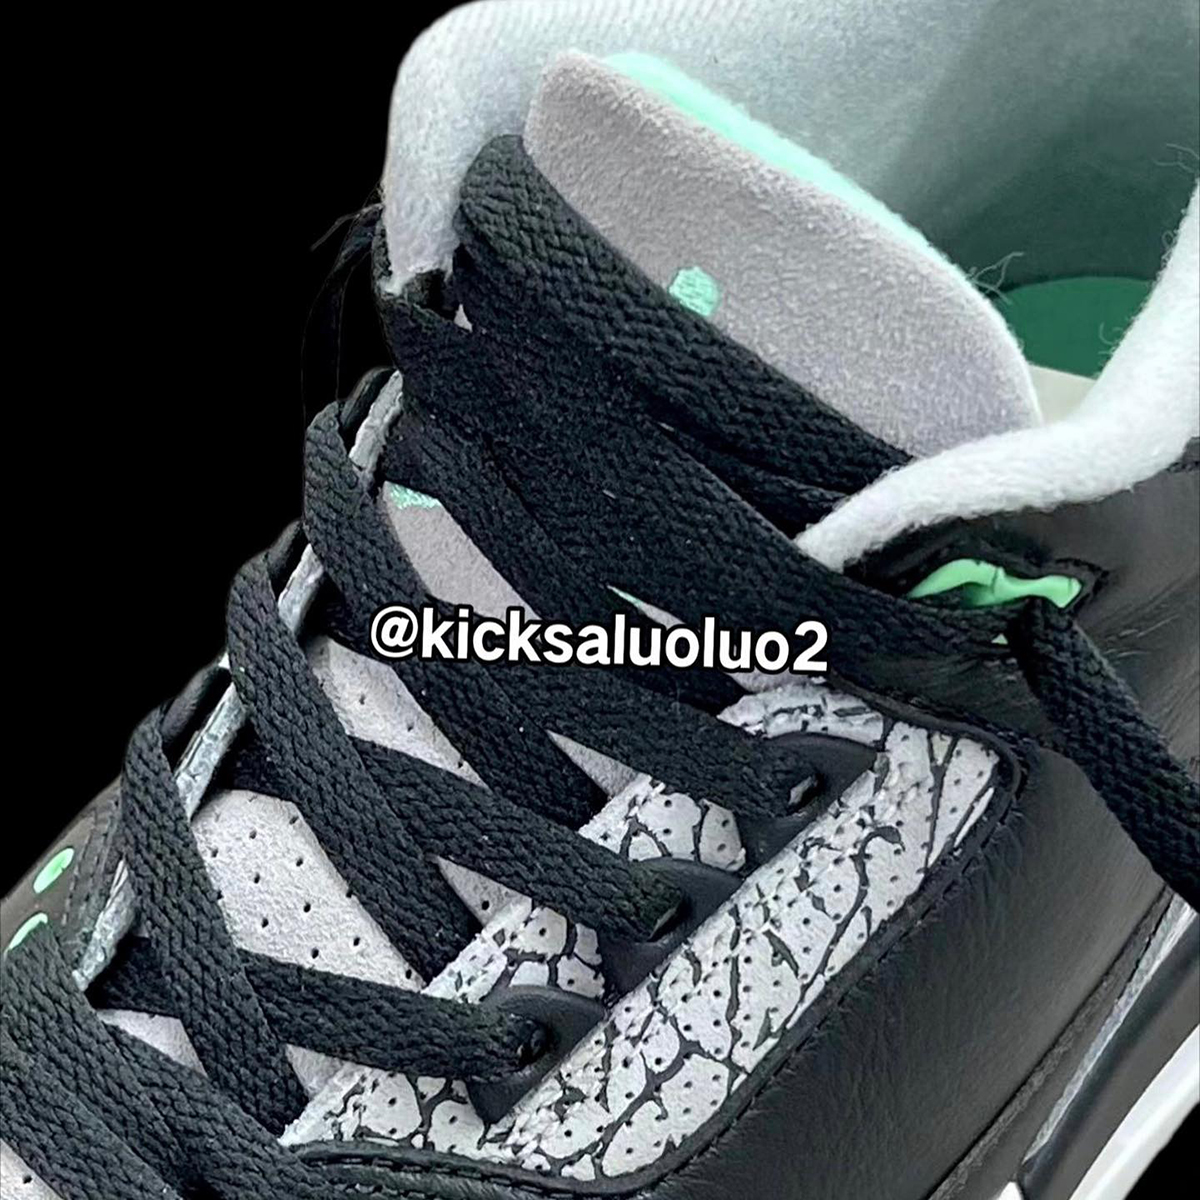 page to see what else Jordan Brand has on the way over the coming months Green Glow Ct8532 031 1